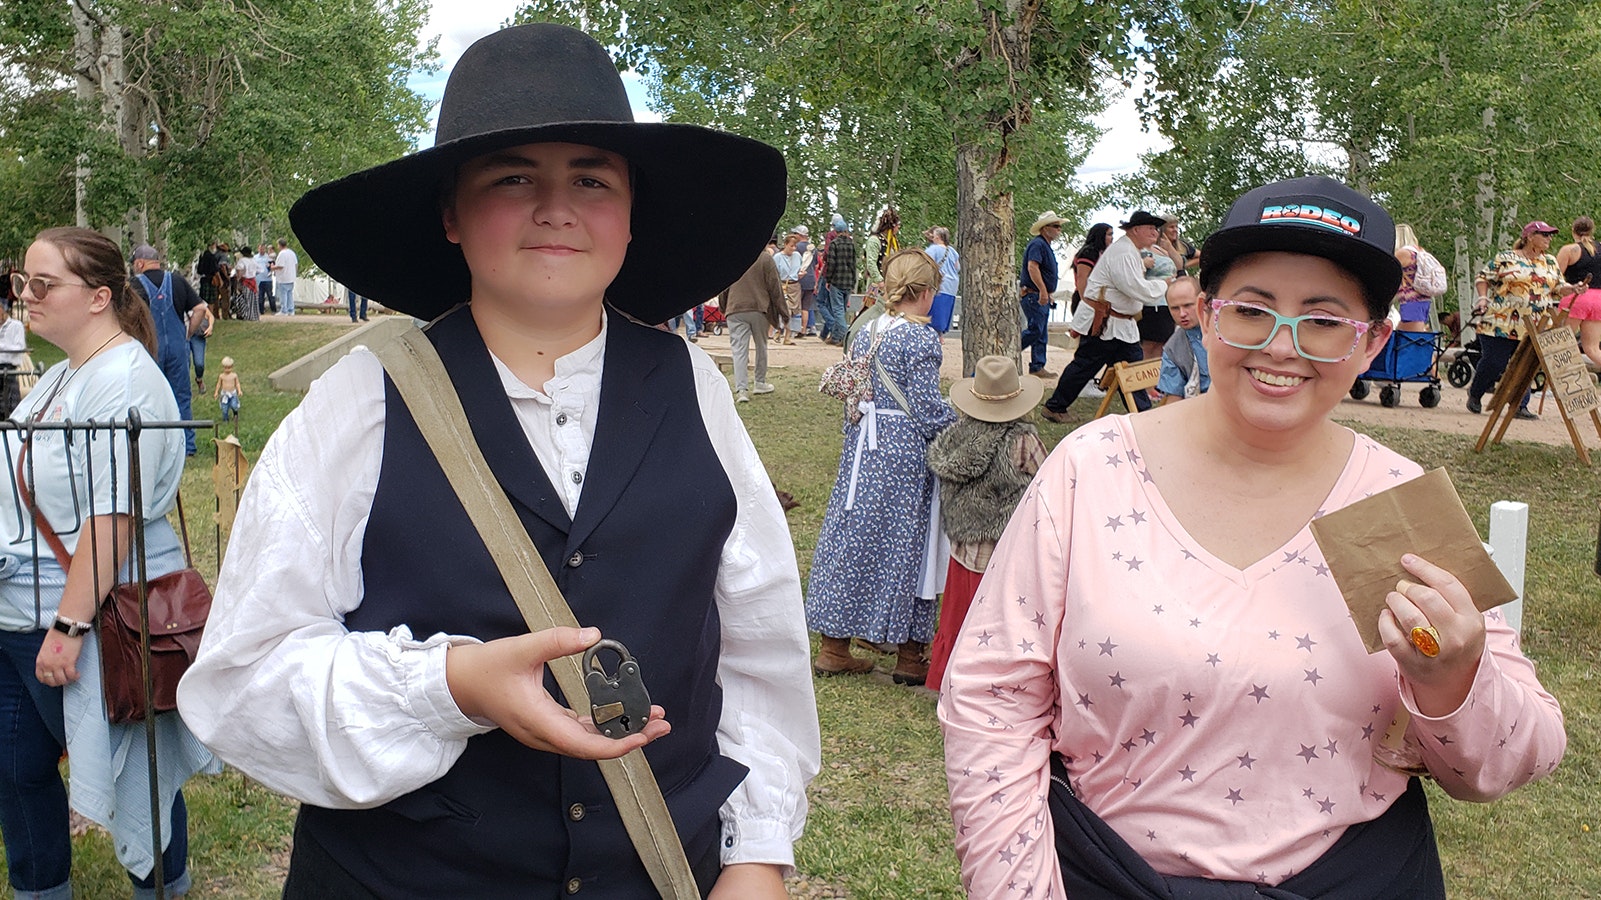 Paden Hamilton with his mom, Leslie Hamilton. Paden is in period dress as an 1850s child. Leslie, meanwhile, is seeking a Southern belle dress to wear to next year's Fort Bridger Rendezvous.